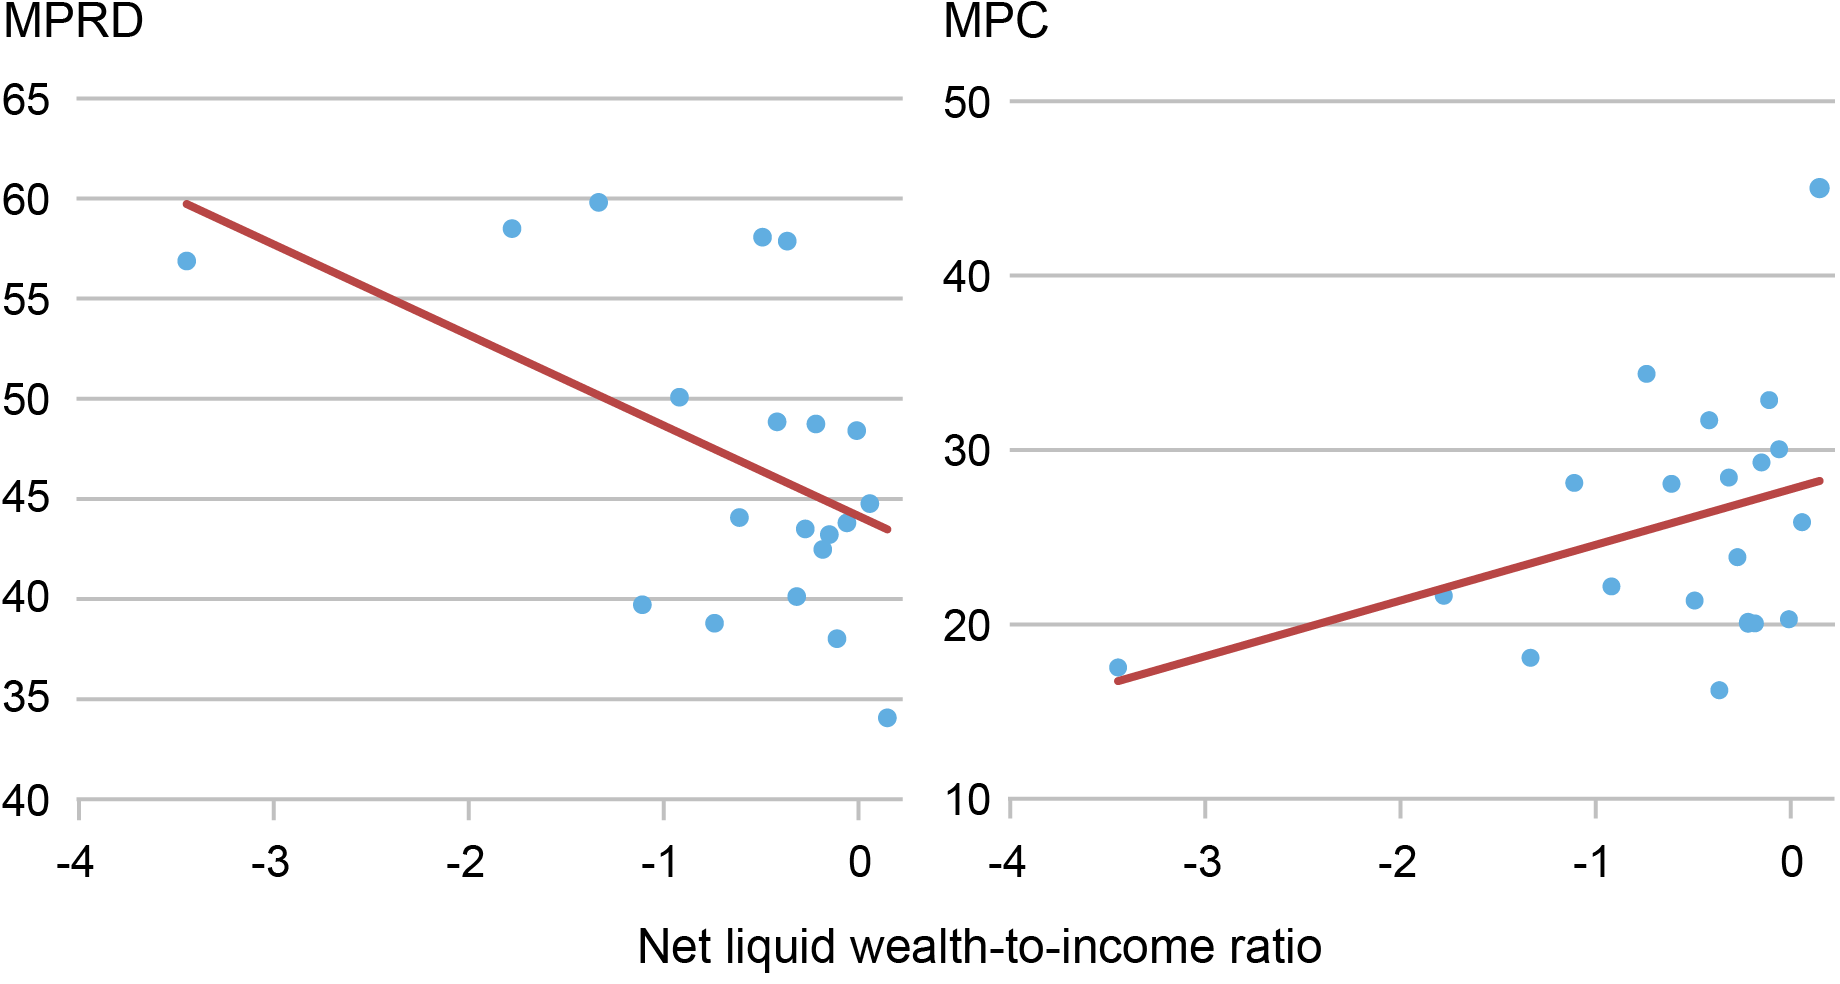 Two-panel scatter plot chart showing the marginal propensity to repay debt (left panel) and the marginal propensity to consume (right panel). Households with low net liquid wealth-to-income ratios are more likely to pay down debt and adjust their net asset positions, while households with lower net-liquid wealth-to-income ratios have lower marginal propensity to consume. 